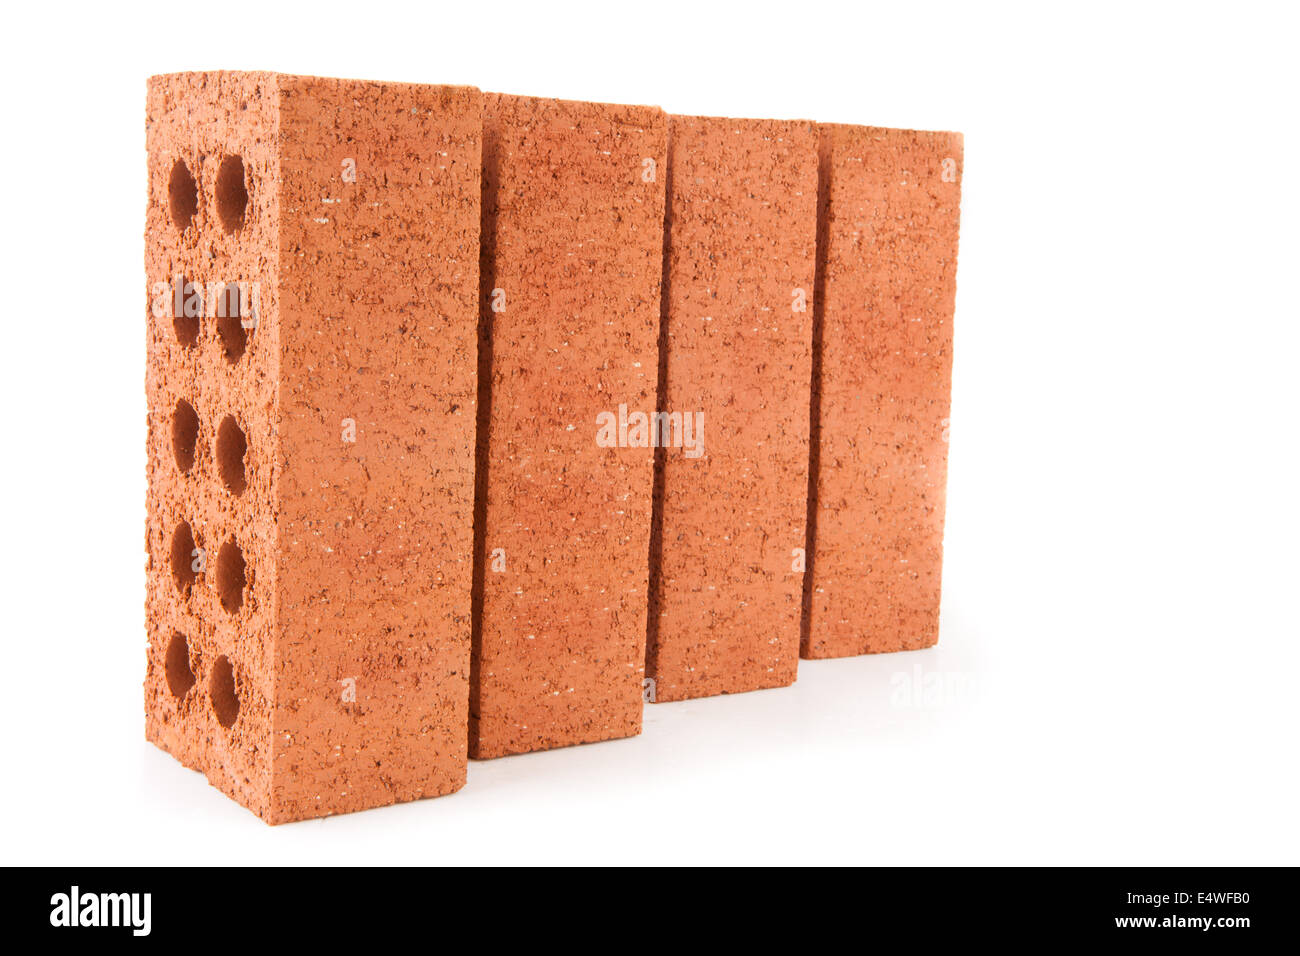 Bricks with holes Cut Out Stock Images & Pictures - Alamy